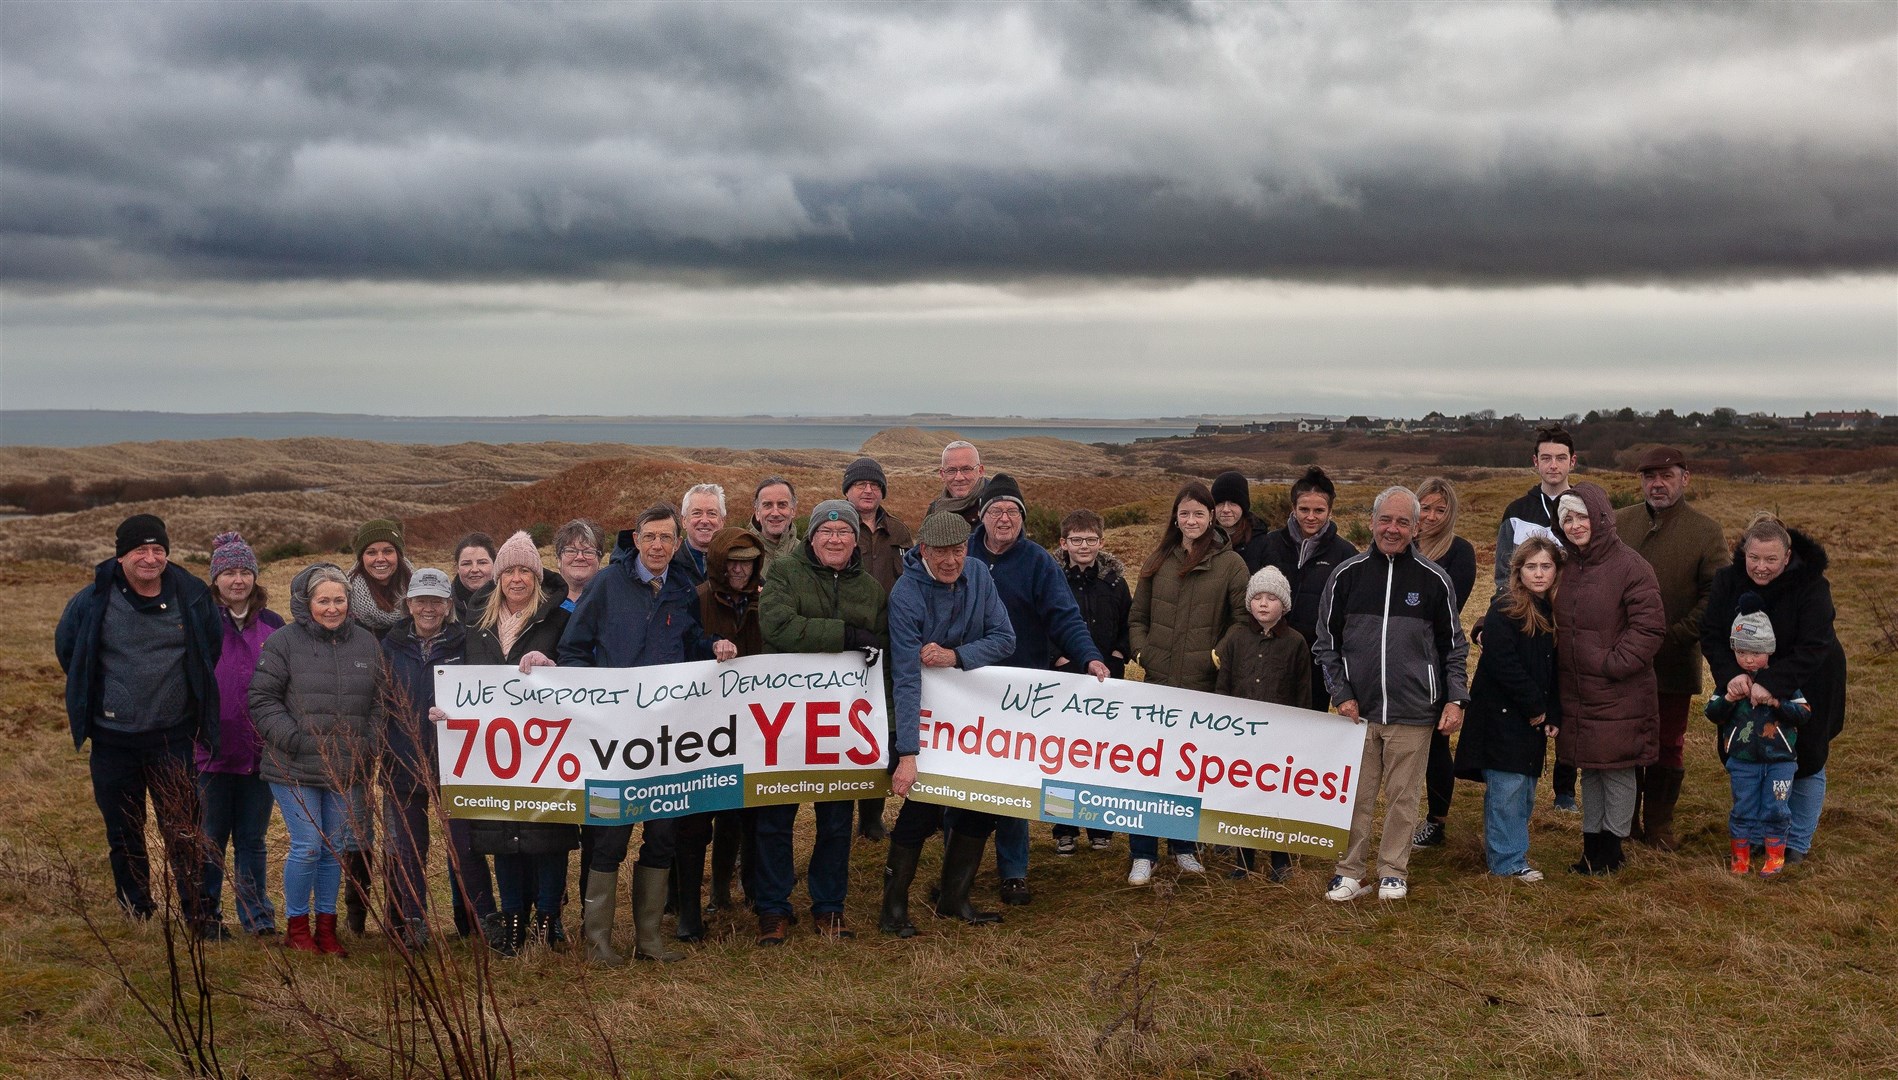 Campaigners have said there is overwhelming local support for the proposed Coul Links course and MSP is out of touch with community feeling.